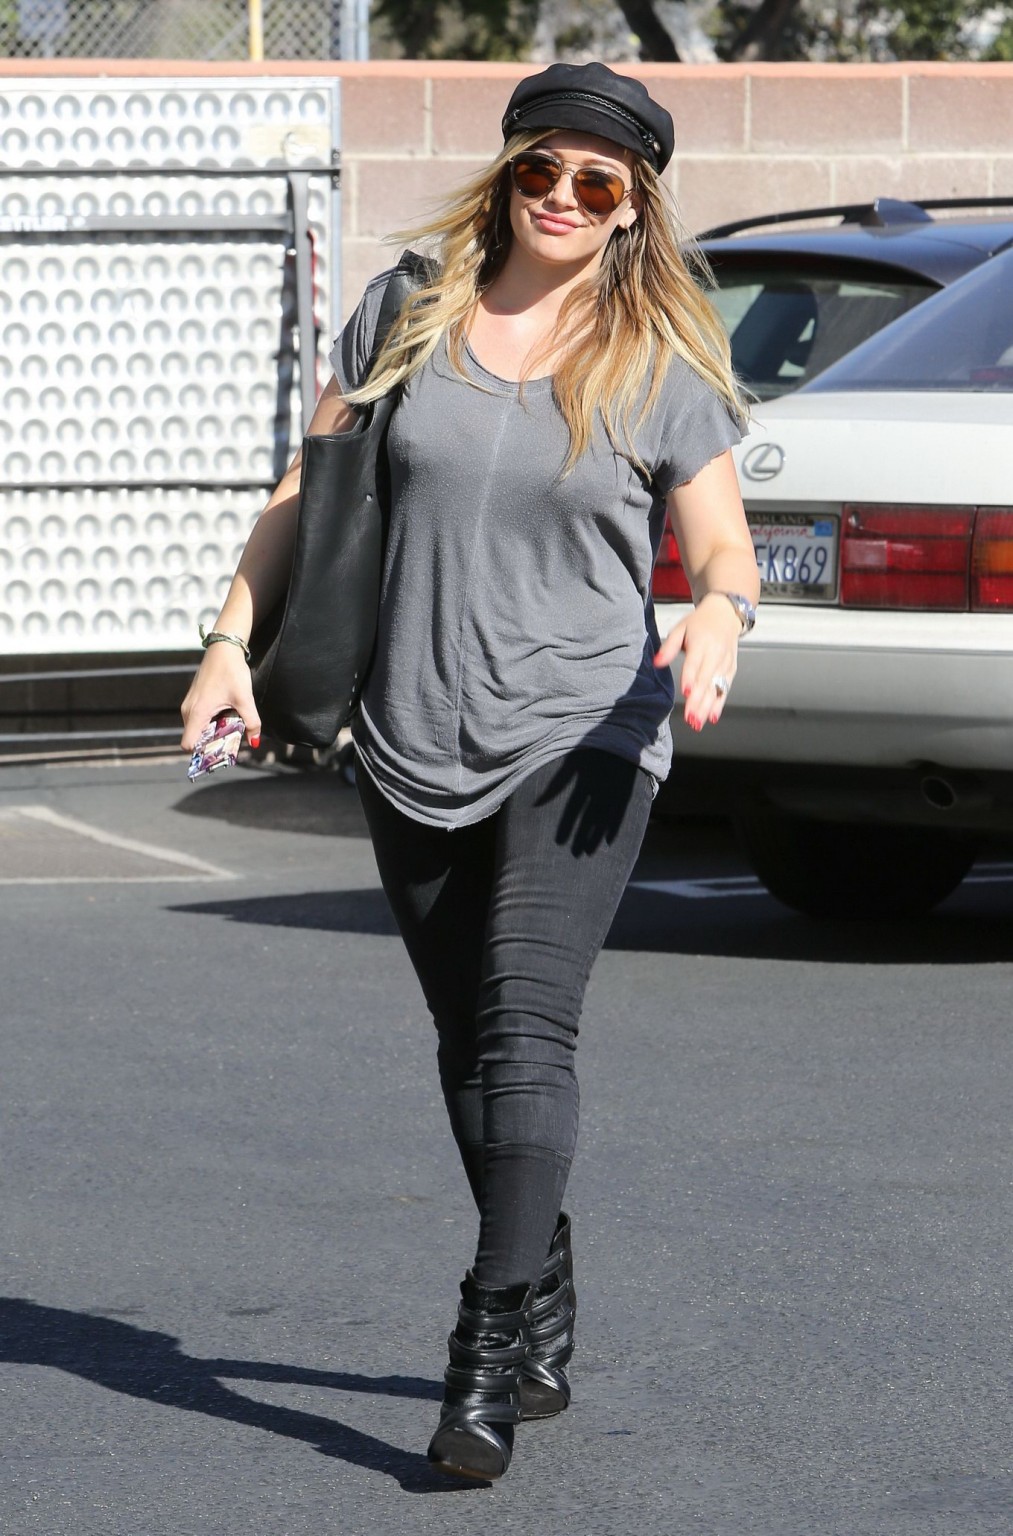 Hilary Duff showing hard pokies in a gray top and tight jeans out in Santa Monic #75213818